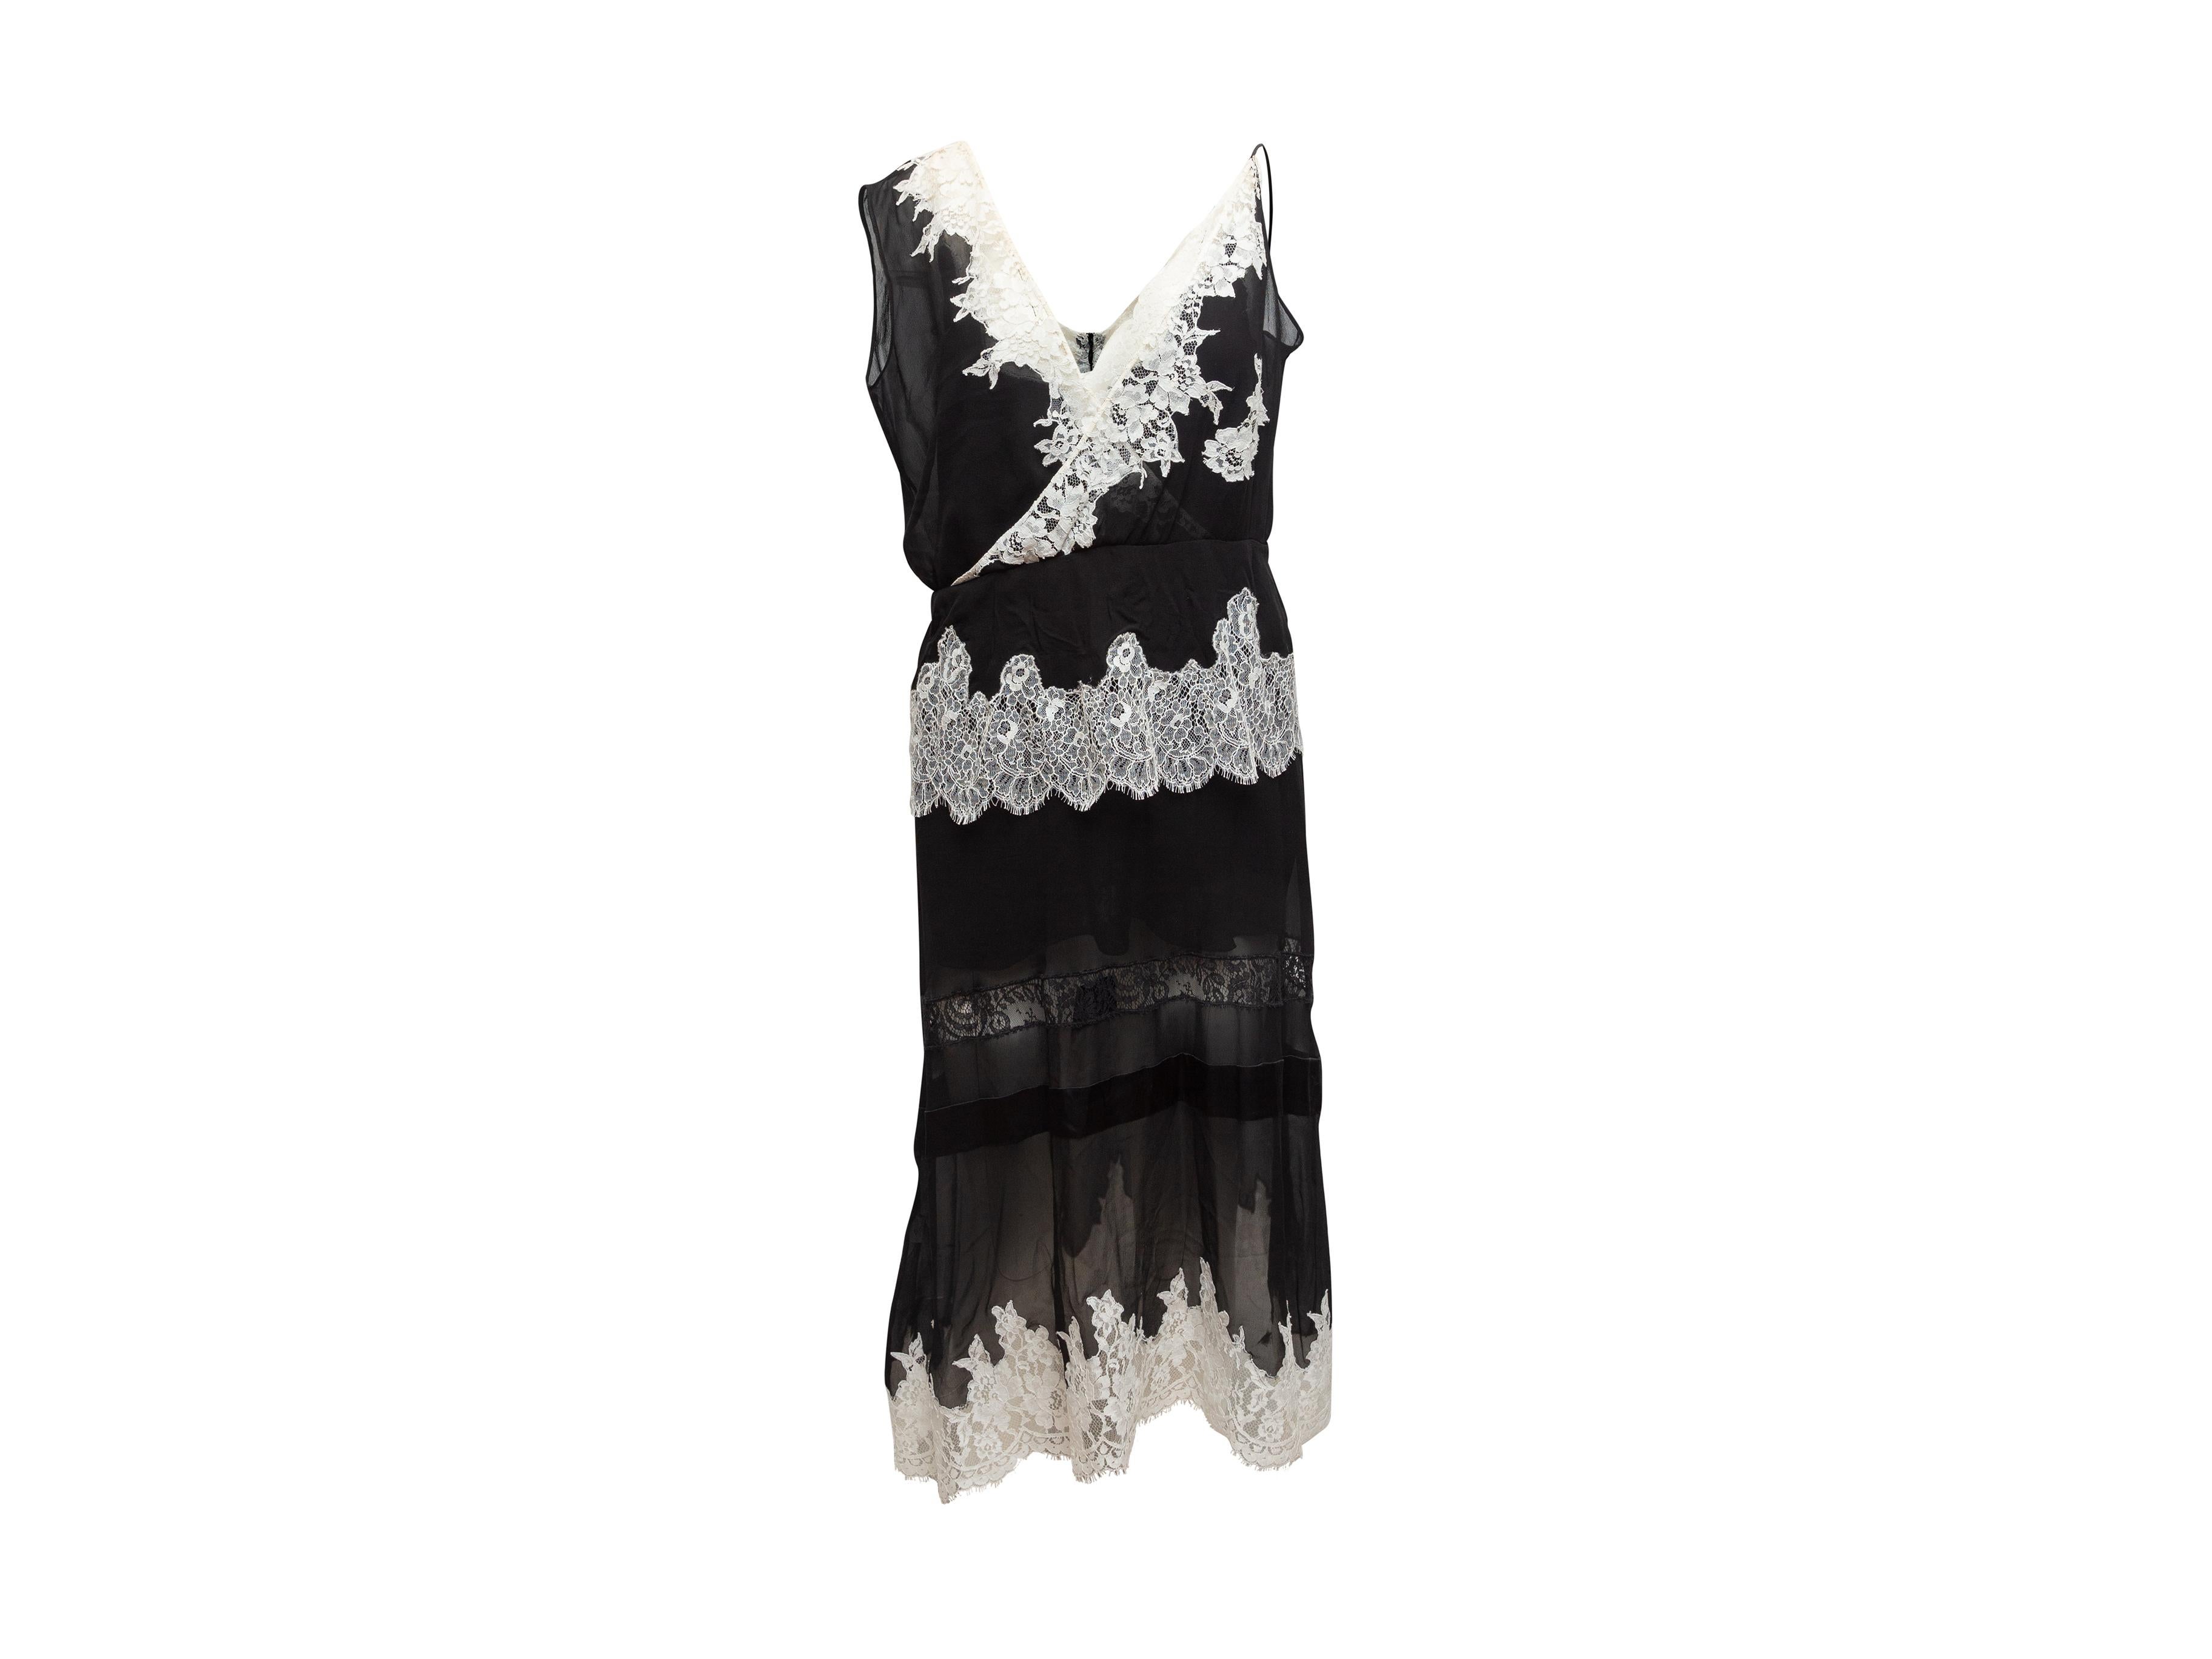 Product details: Black and white sleeveless silk dress by Altuzarra. Lace trim throughout. V-neck. Zip closure at back. Designer size 42. 36